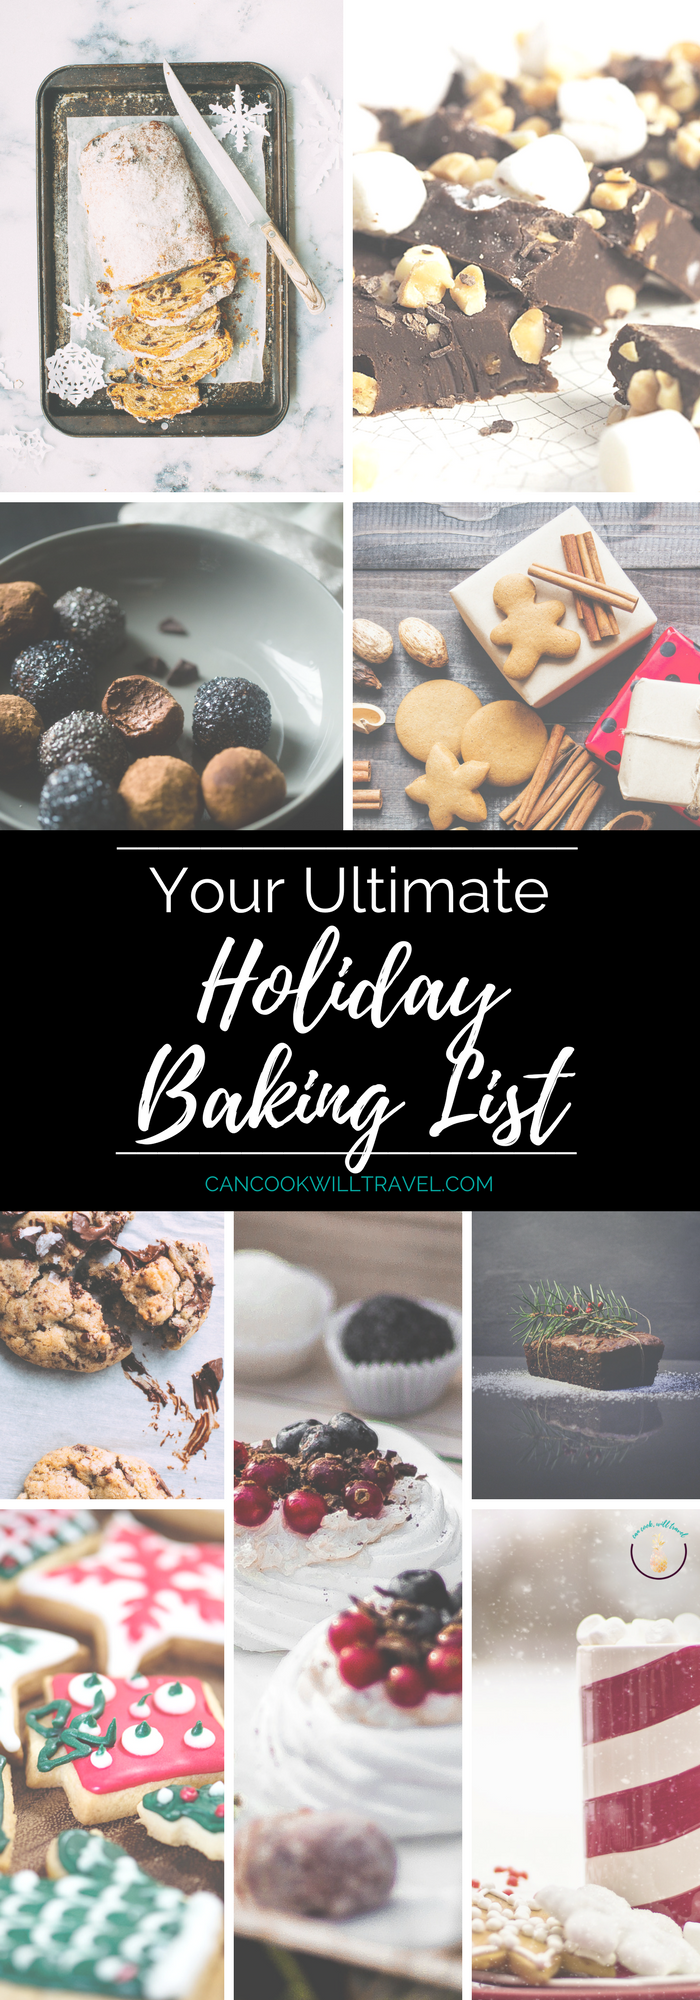 Ultimate Holiday Baking List_Tall